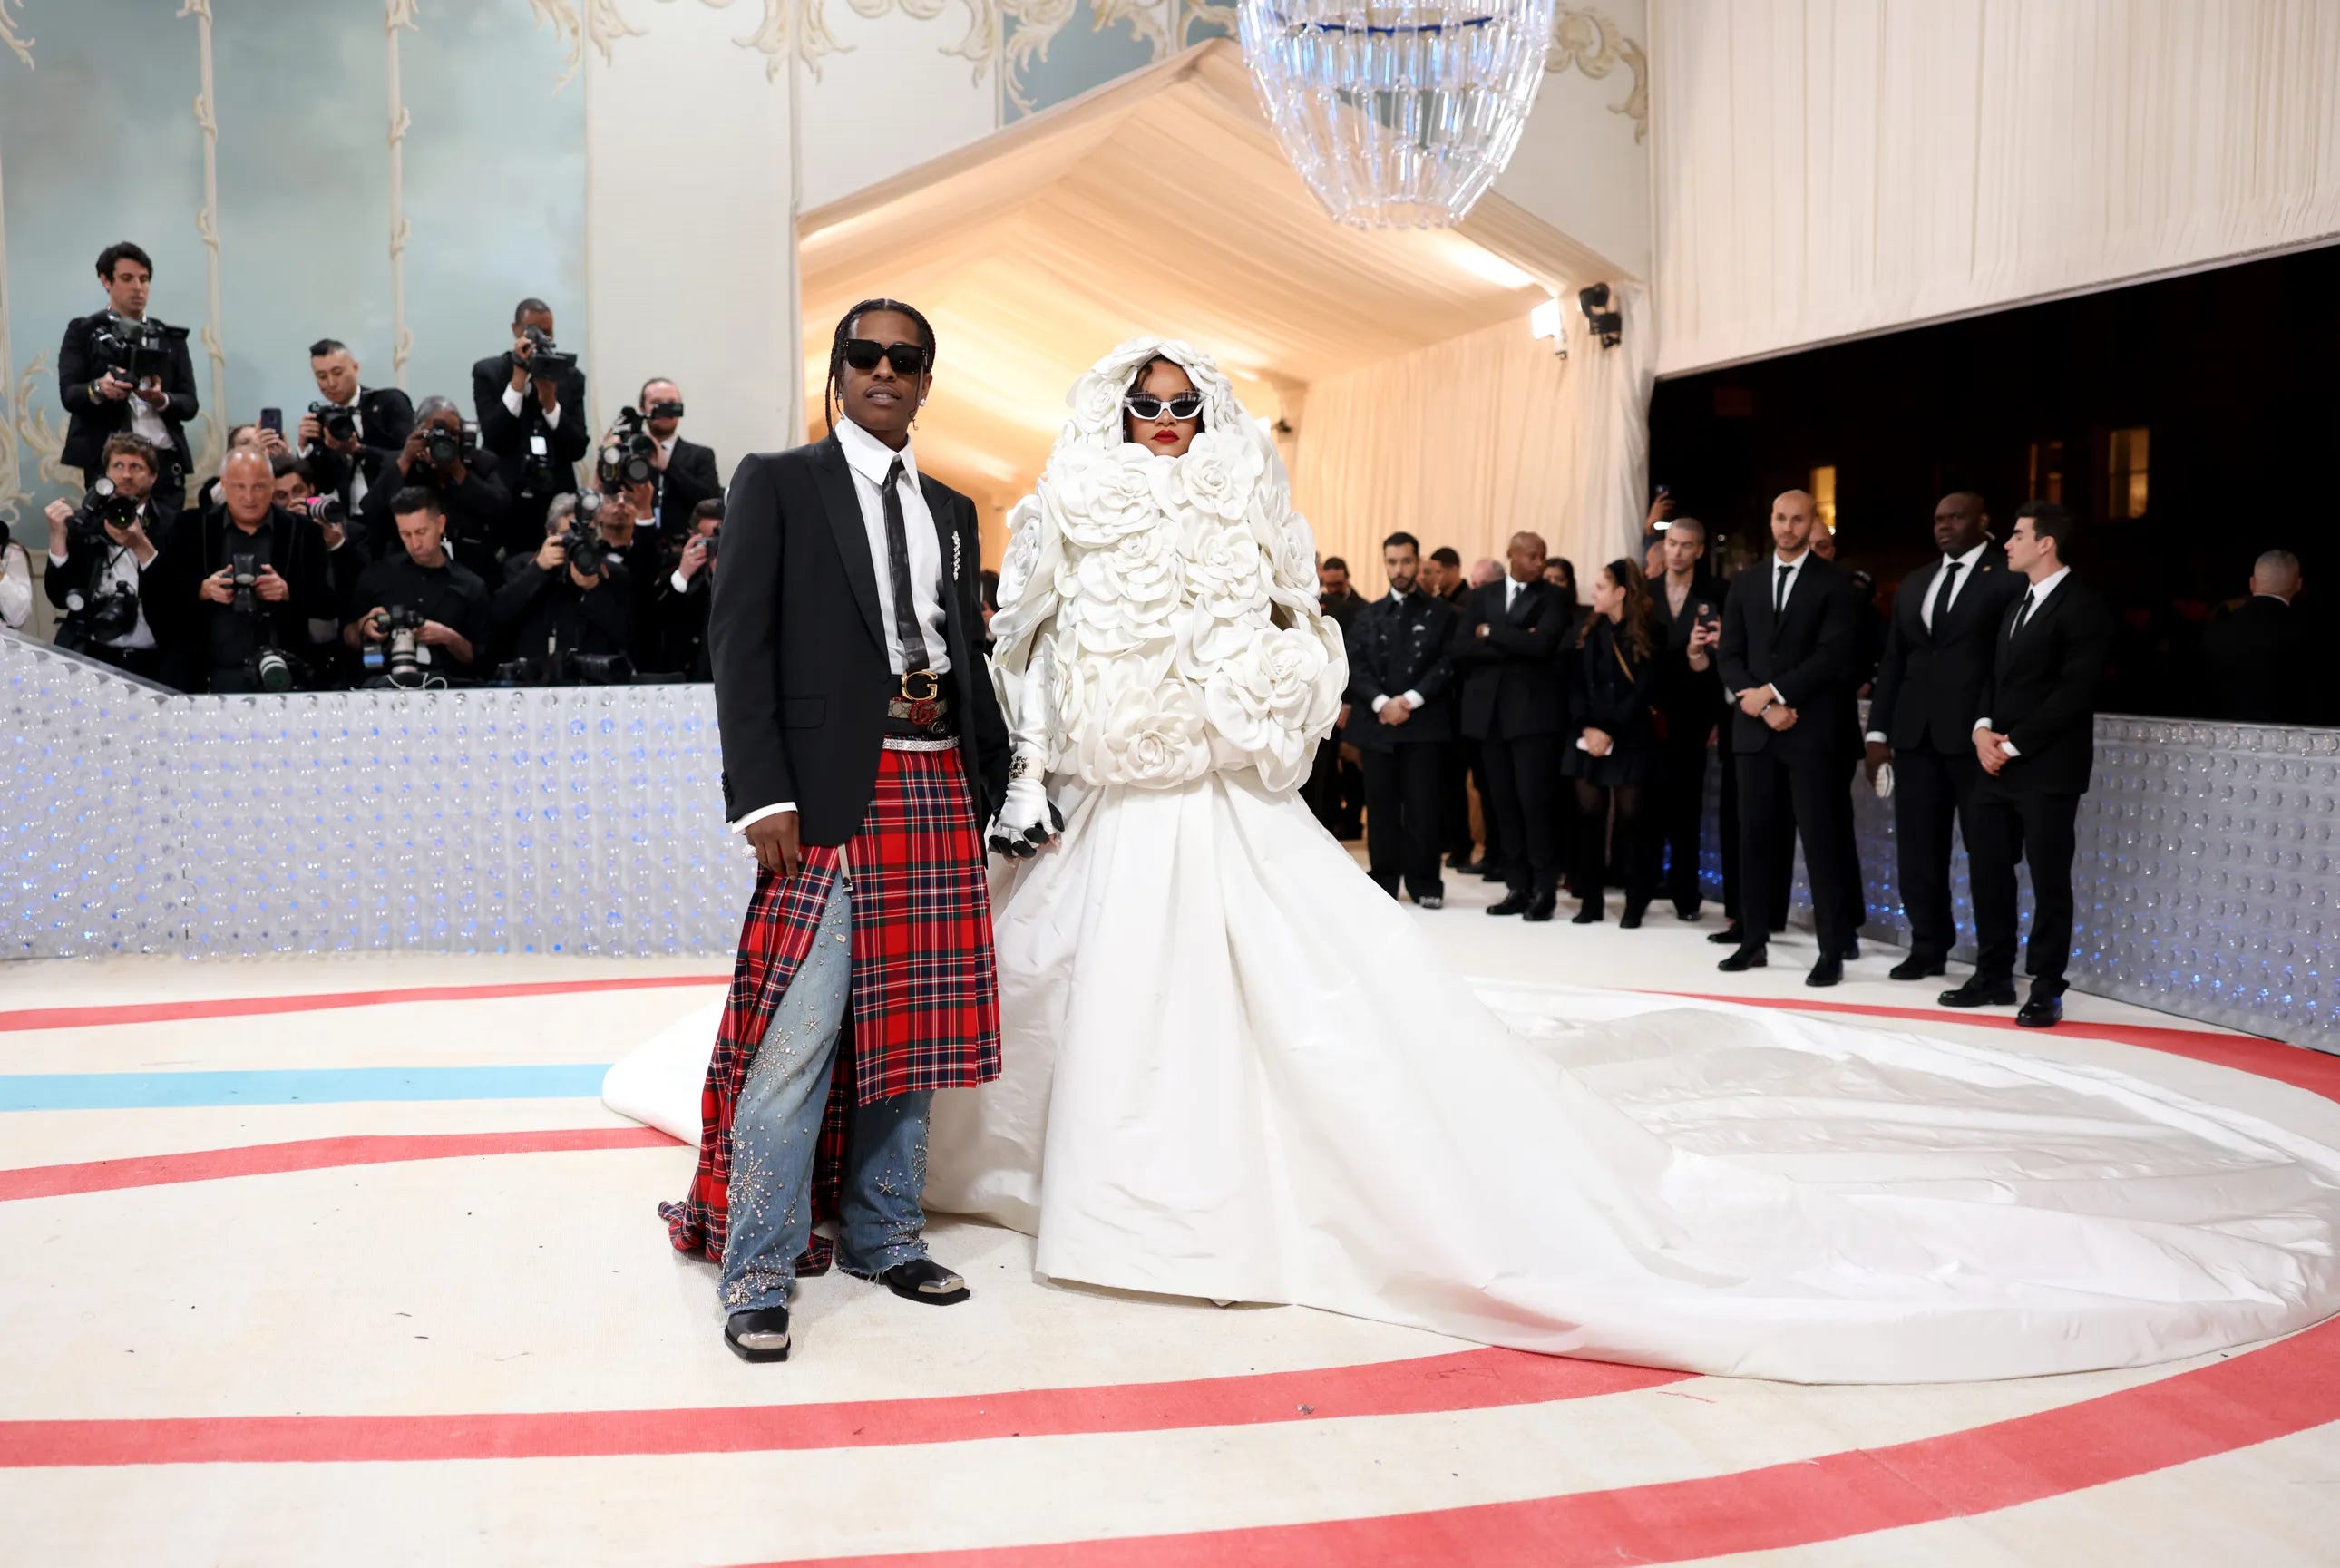 Louis Vuitton Blew Off The Met Gala Theme Completely - Go Fug Yourself